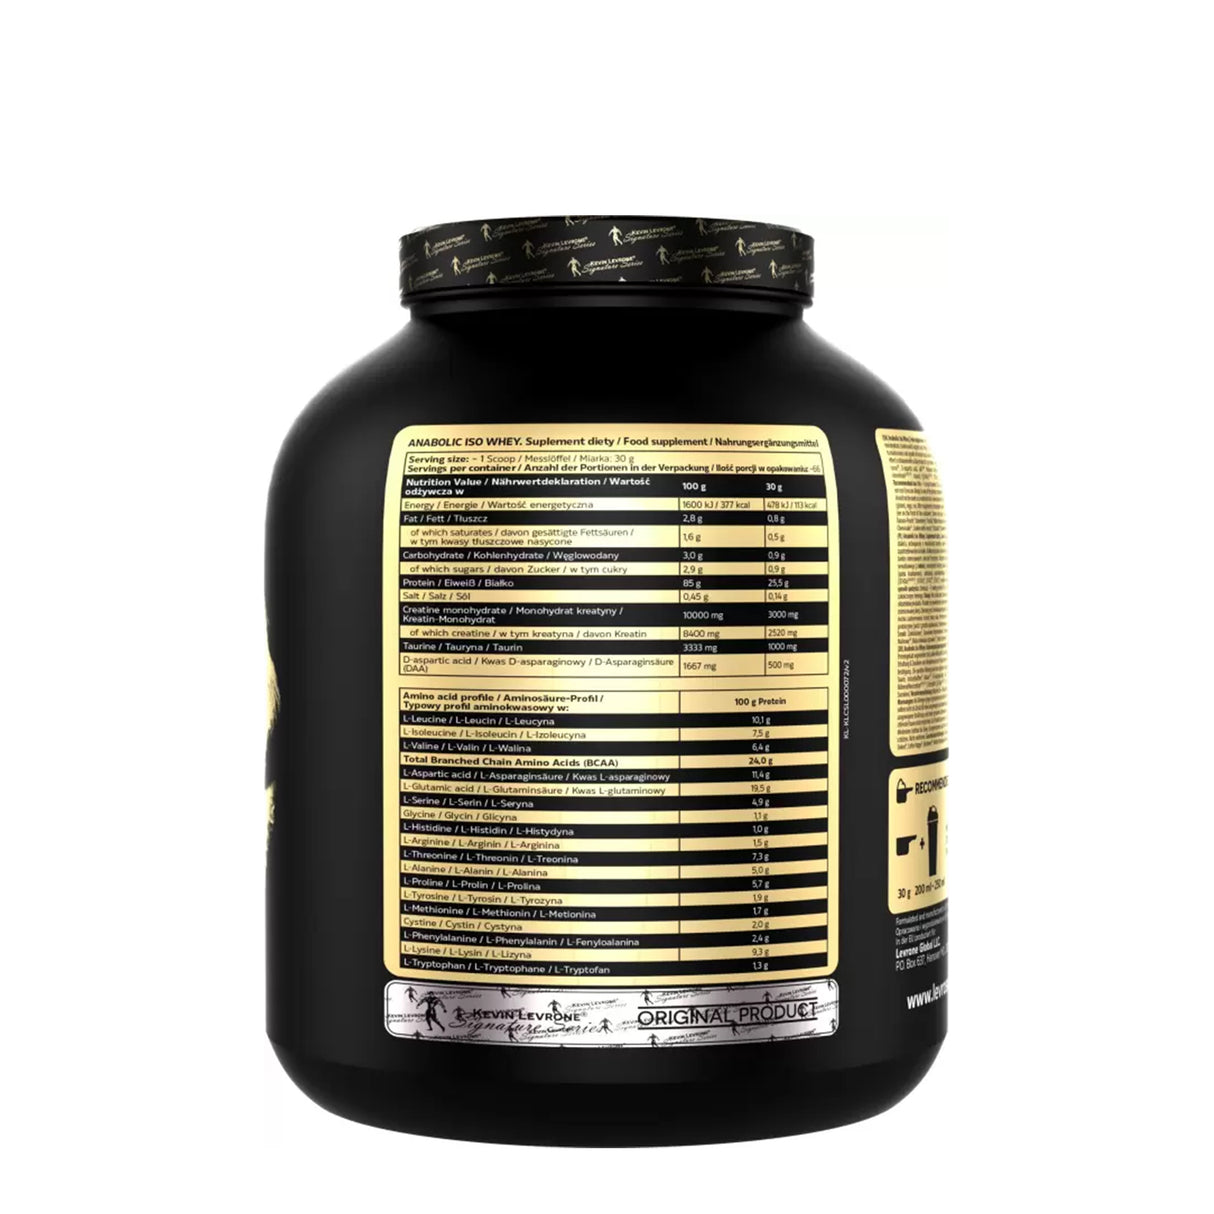 LEVRONE ANABOLIC ISO WHEY | CHOCOLATE FLAVOR - NUTRITION FACTS | GYMSUPPLEMENTSUS.COM 